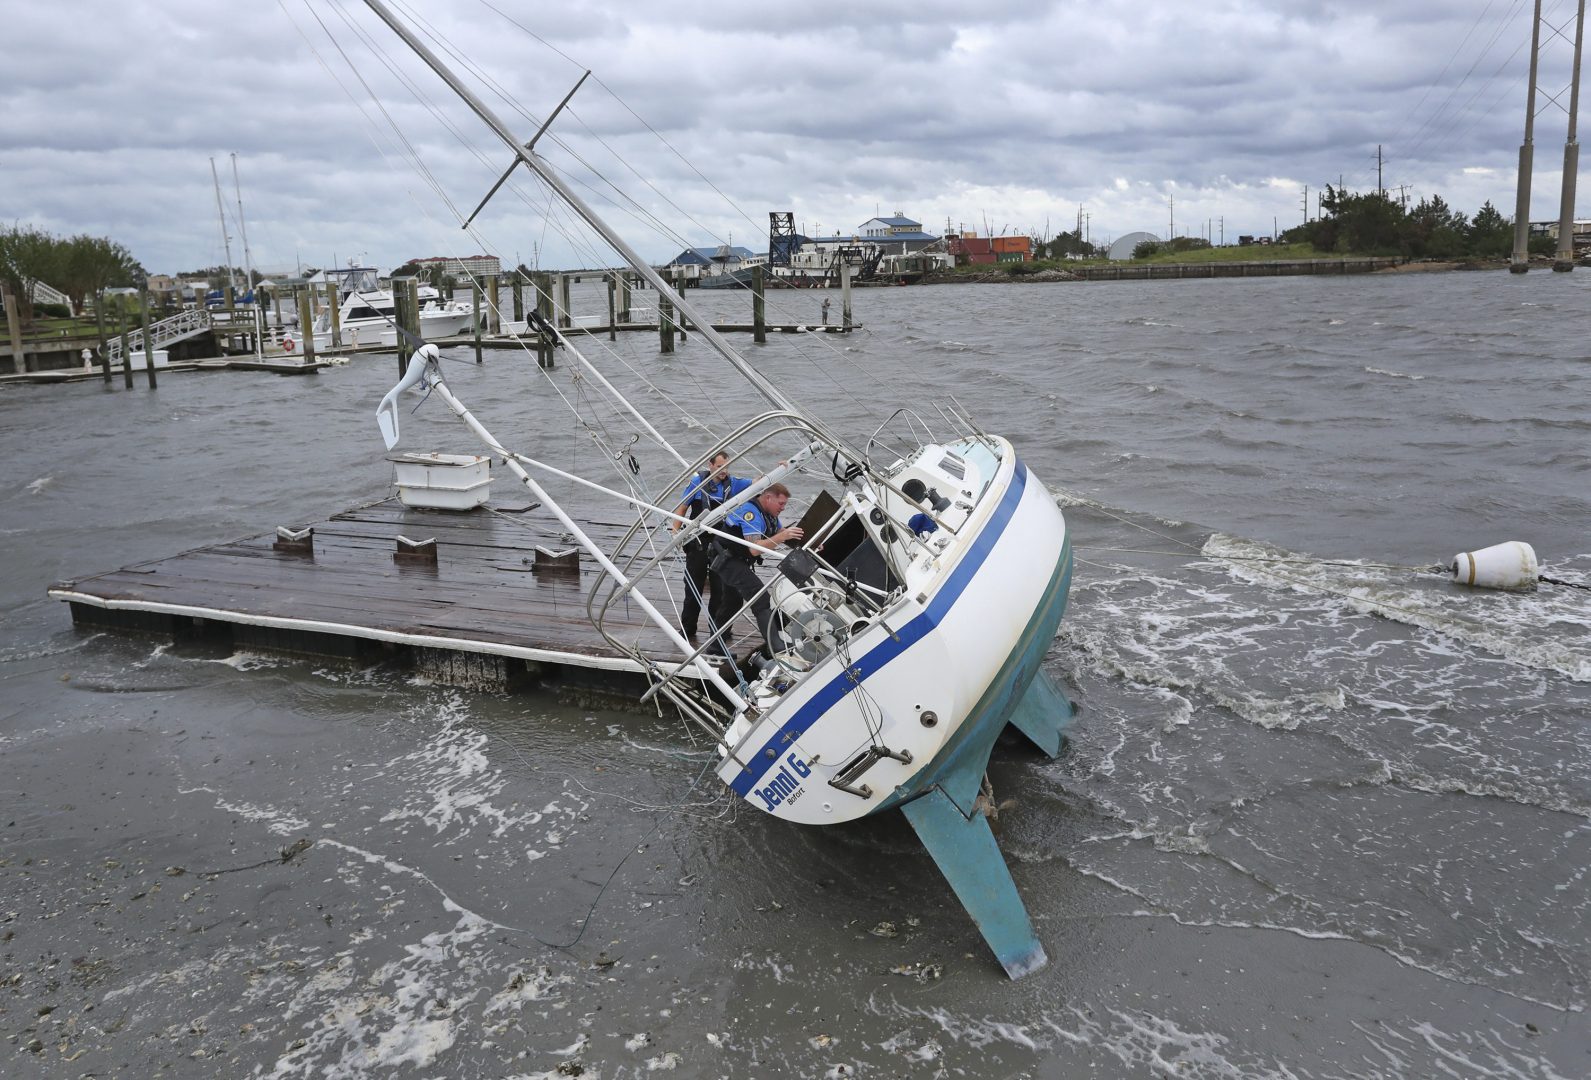 Beaufort Police Officer Curtis Resor, left, and Sgt. Micheal Stepehens check a sailboat for occupants in Beaufort, N.C. after Hurricane Dorian passed the North Carolina coast on Friday, Sept. 6, 2019. Dorian howled over North Carolina's Outer Banks on Friday — a much weaker but still dangerous version of the storm that wreaked havoc in the Bahamas — flooding homes in the low-lying ribbon of islands and throwing a scare into year-round residents who tried to tough it out.